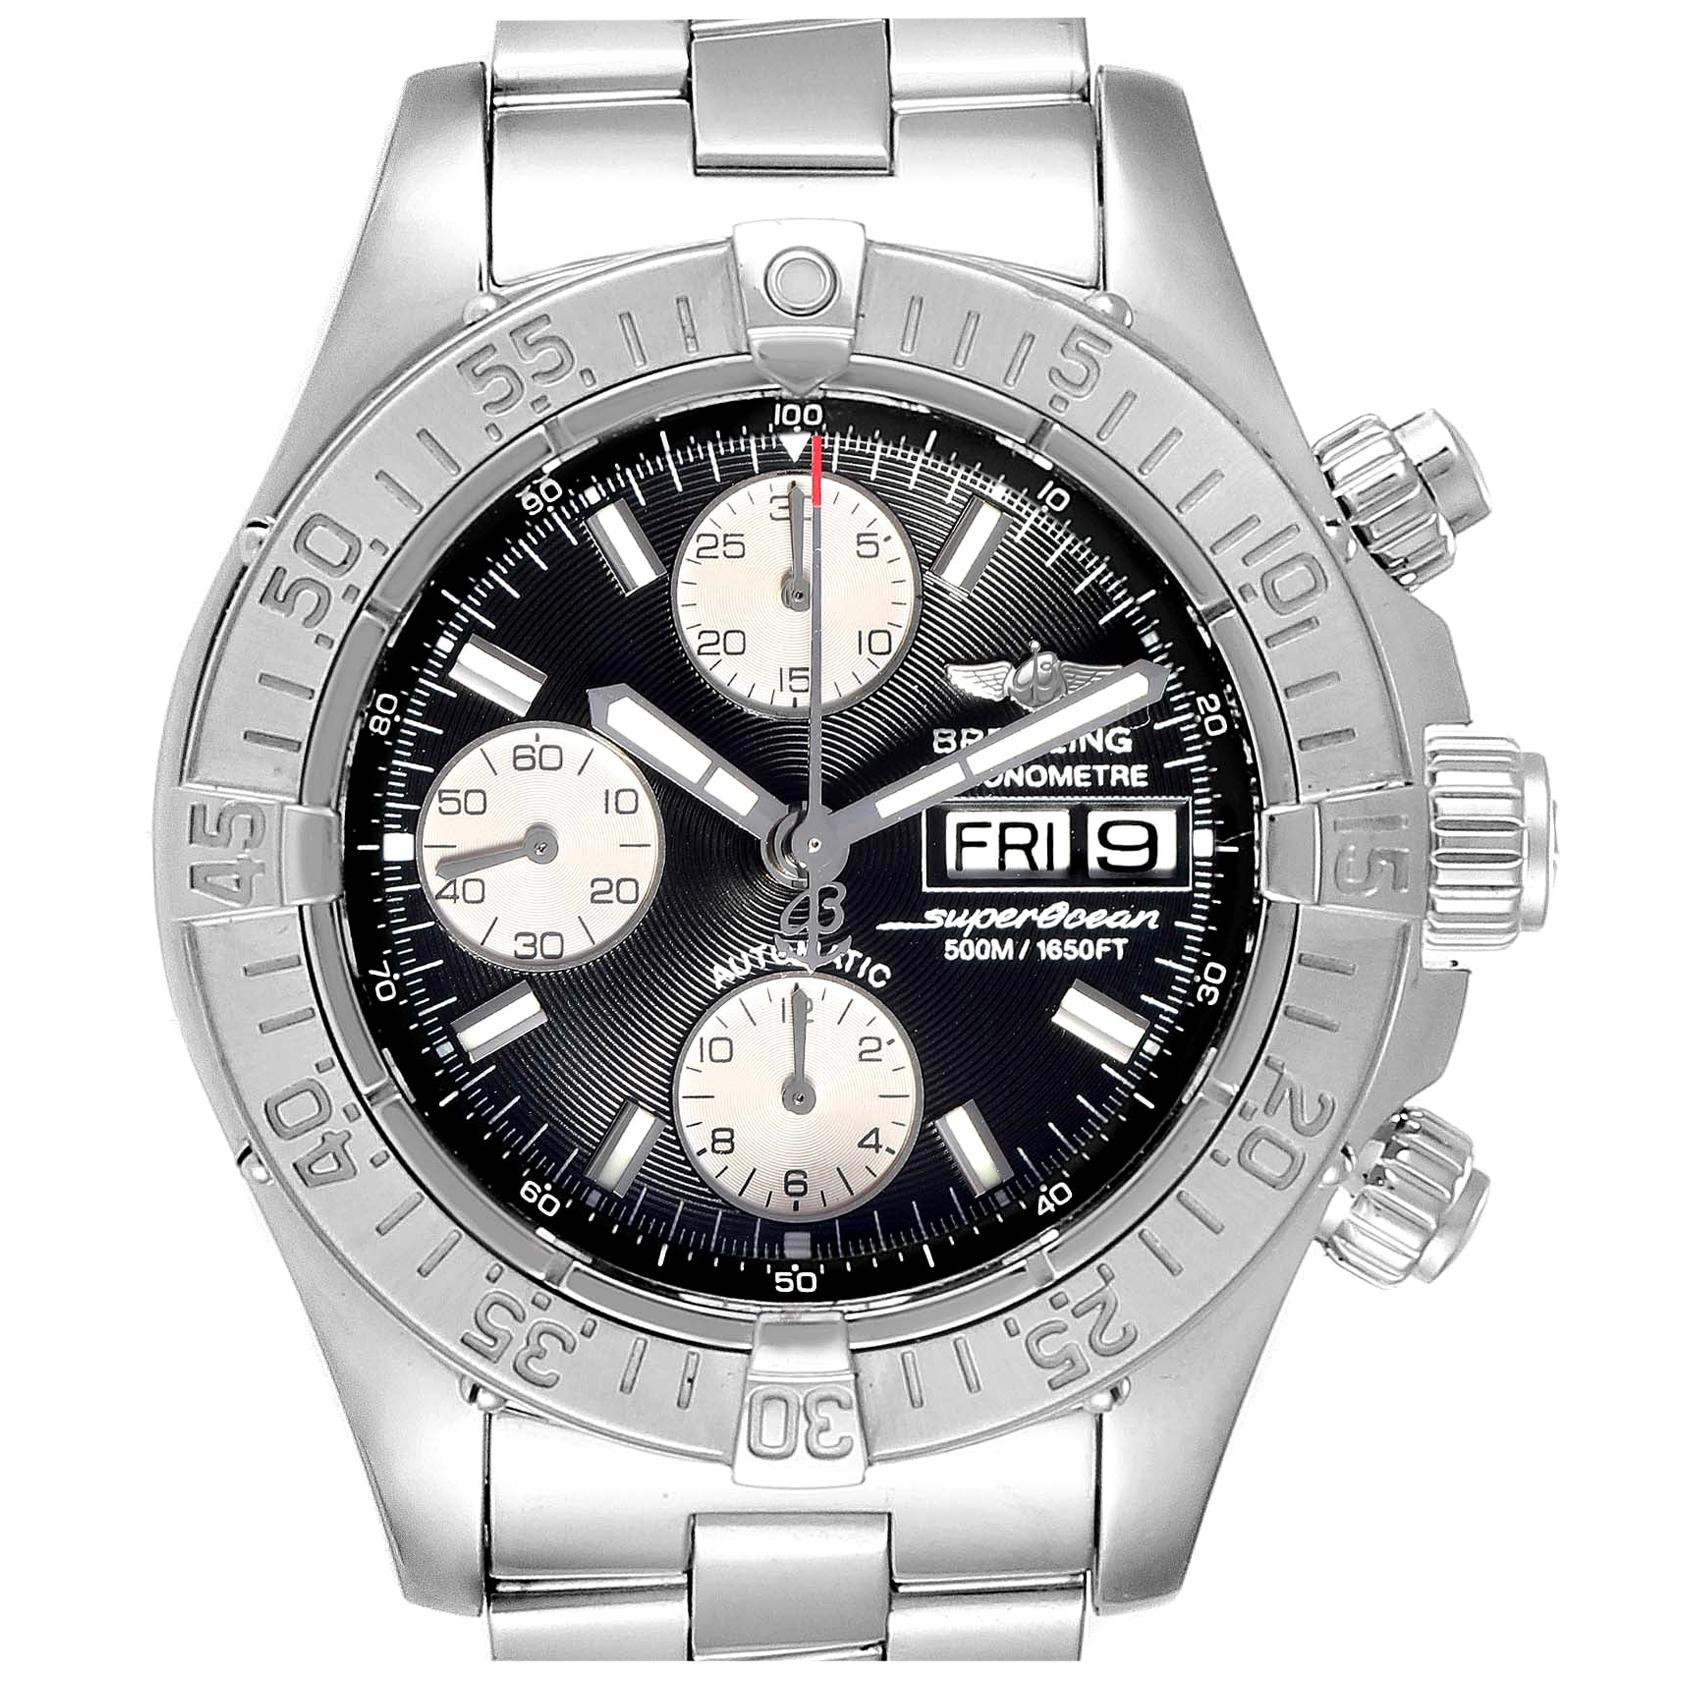 Breitling Aeromarine Superocean Chronograph Watch A13340 Box Papers For Sale